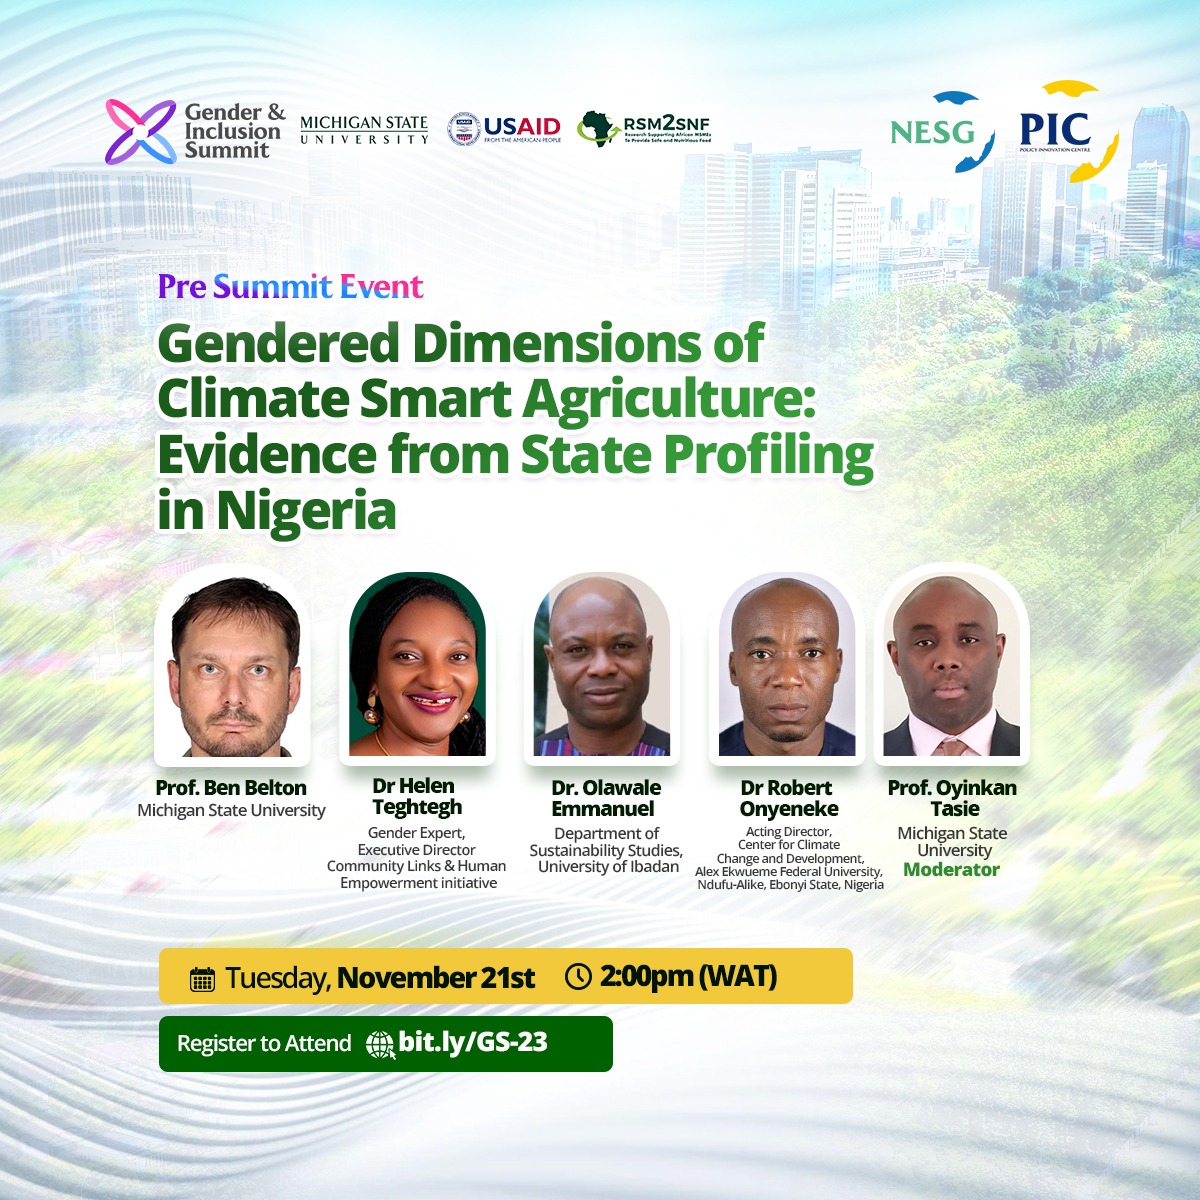 Gendered Dimensions of Climate Smart Agriculture: Evidence from State Profiling in Nigeria